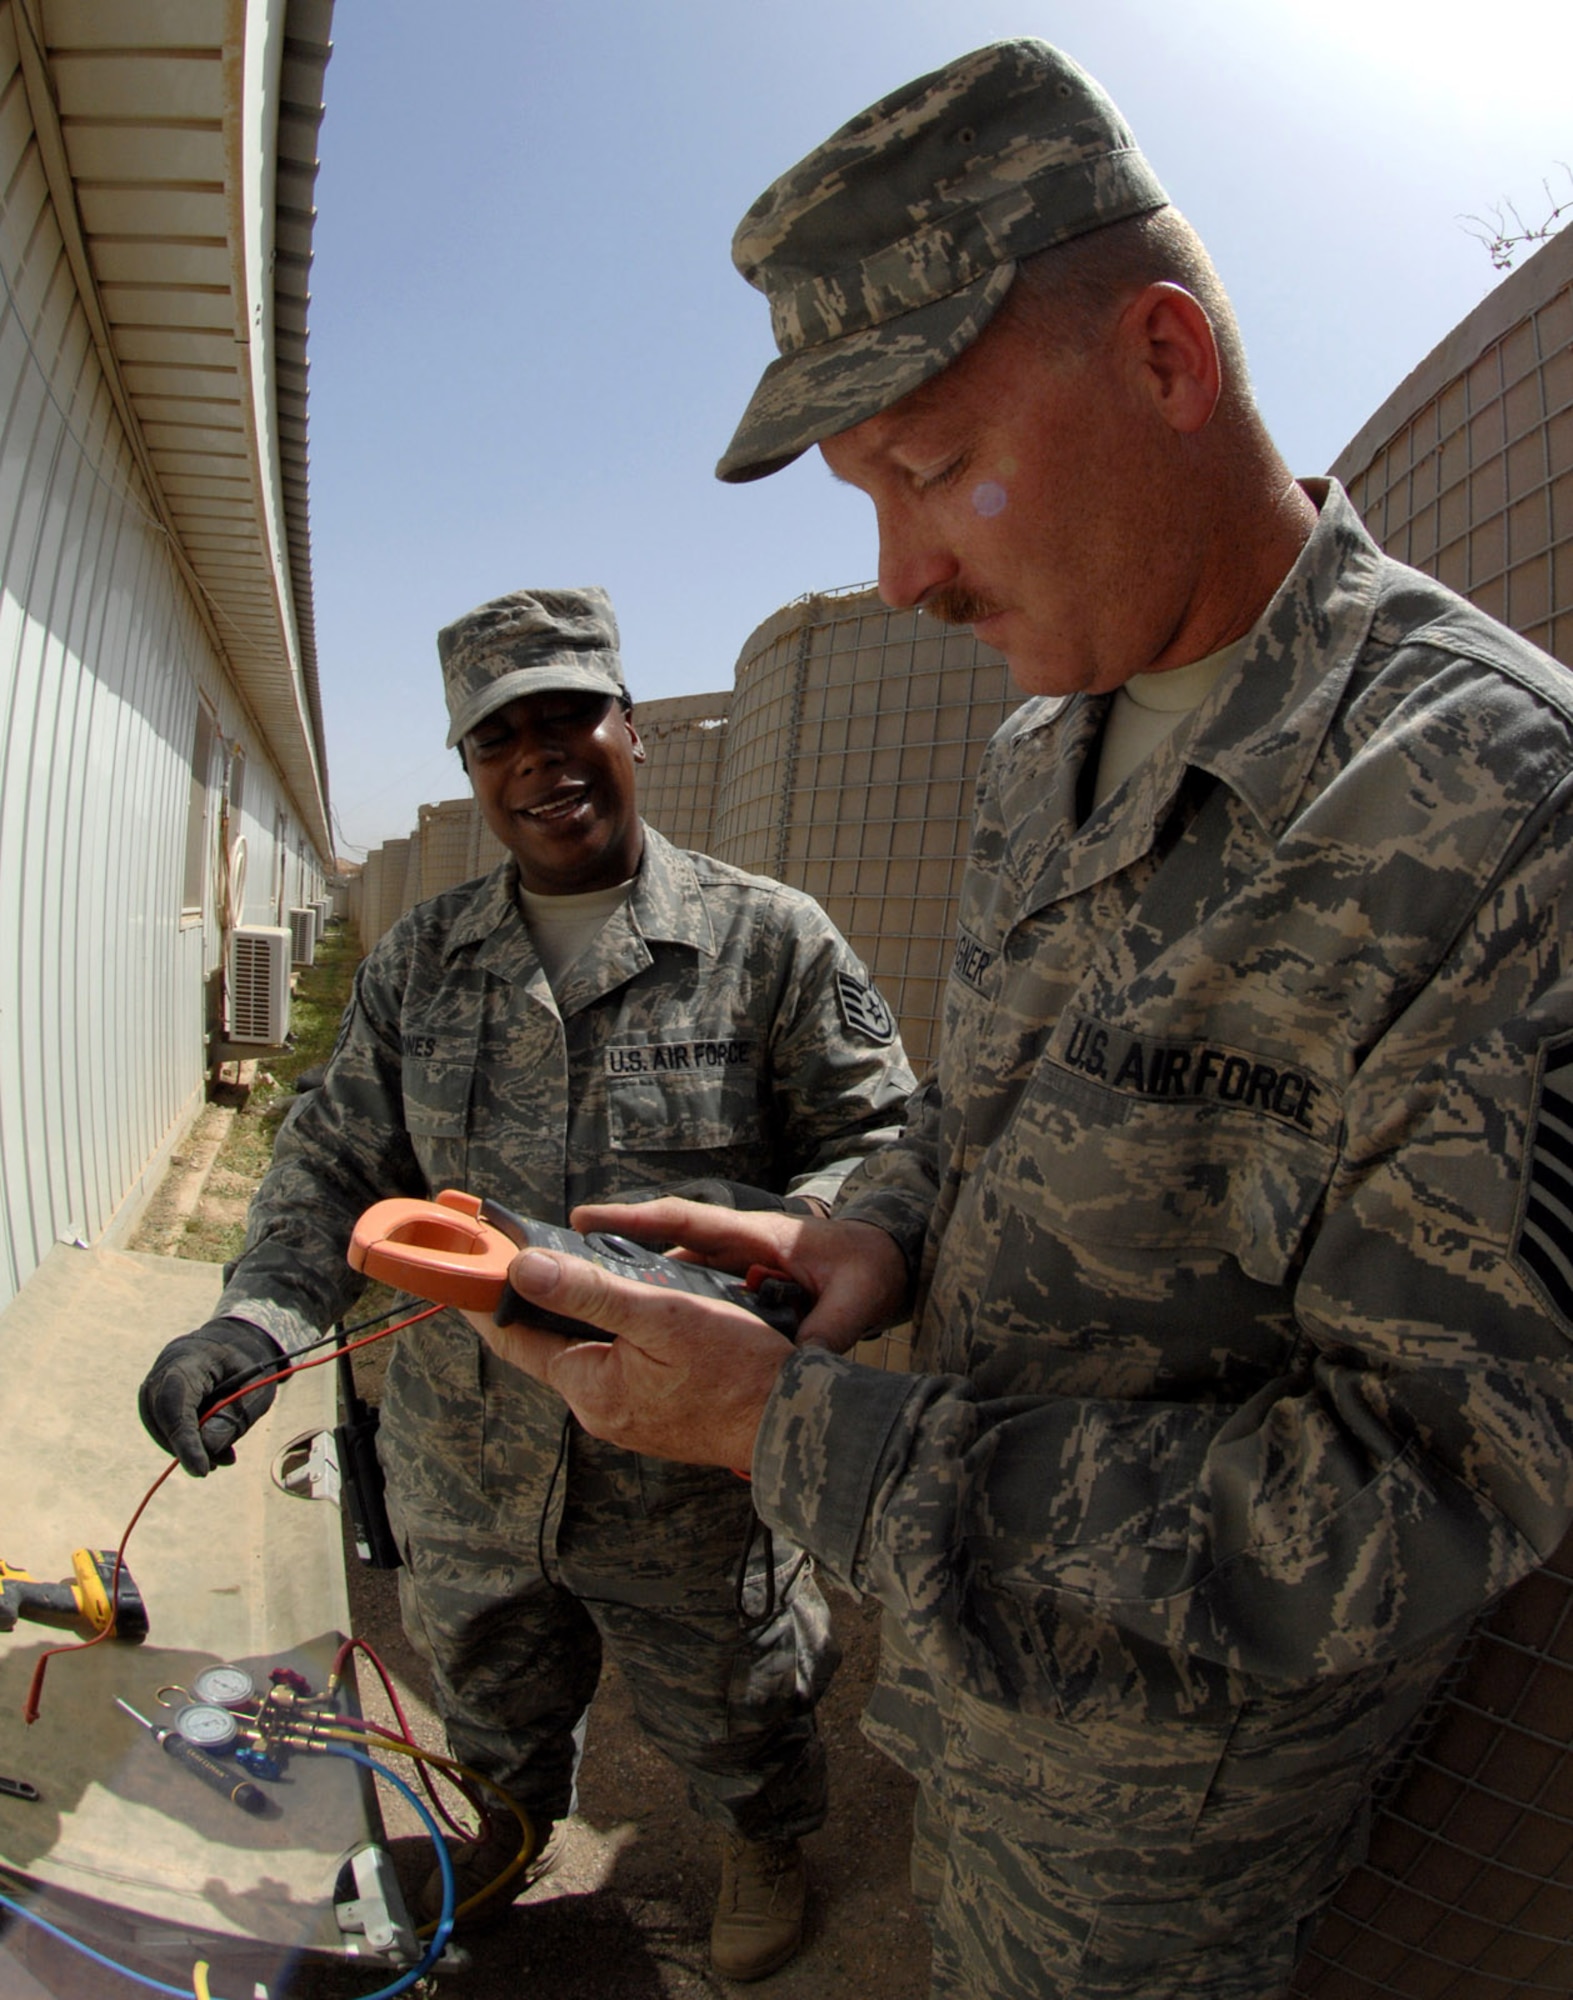 KIRKUK REGIONAL AIR BASE, Iraq – Staff Sgt. Terrica Jones and Master Sgt. Scott Wagner, 506th Expeditionary Civil Engineer Squadron, respond to a service call due to complications with an air conditioning unit April 23 here. Sergeant Wagner is deployed here from Beale Air Force Base, Calif., and is a native of Reno, Nev. Sergeant Jones is deployed here from Seymour Johnson AFB, N.C., and is a native of Fayetteville, N.C. (U.S. Air Force photo by Senior Airman SerMae Lampkin)
